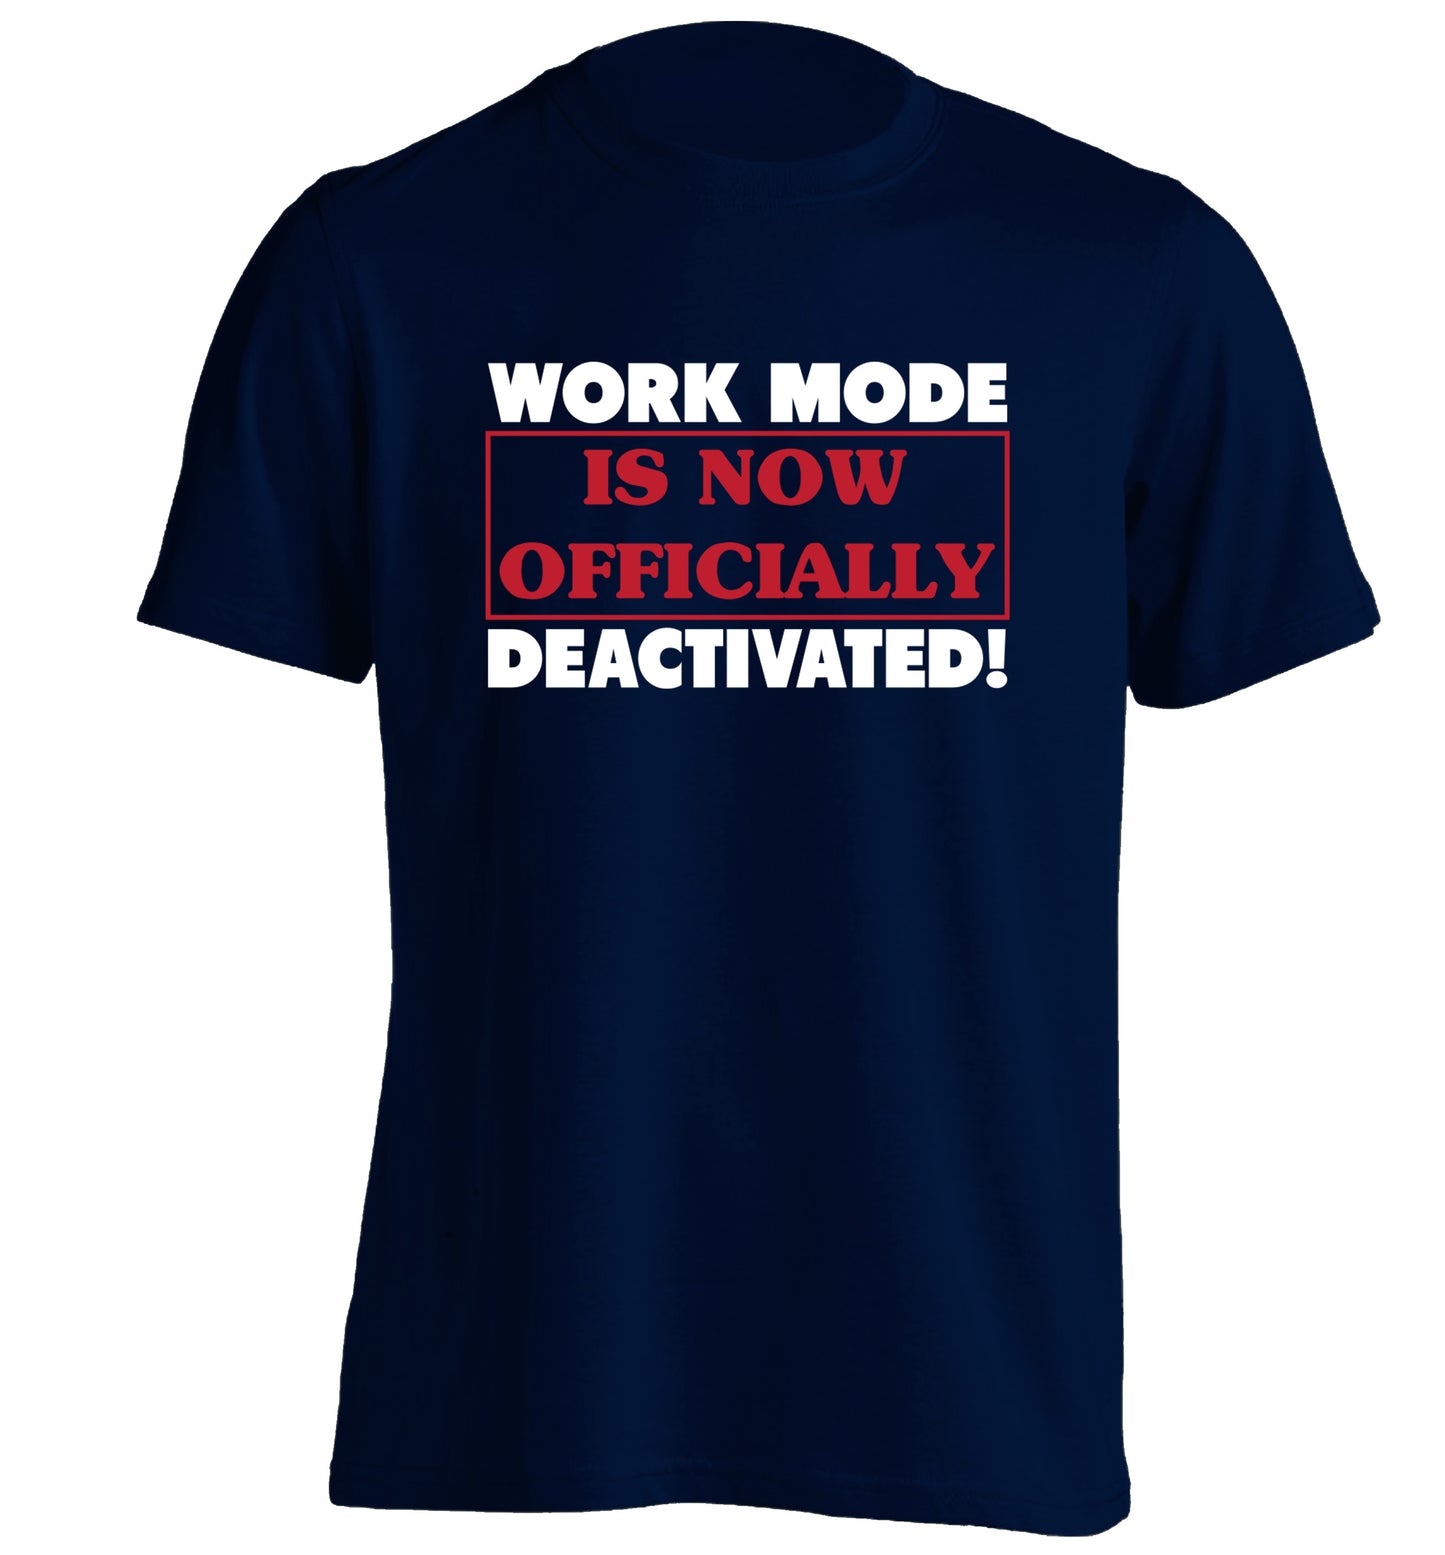 Work mode is now officially deactivated adults unisex navy Tshirt 2XL